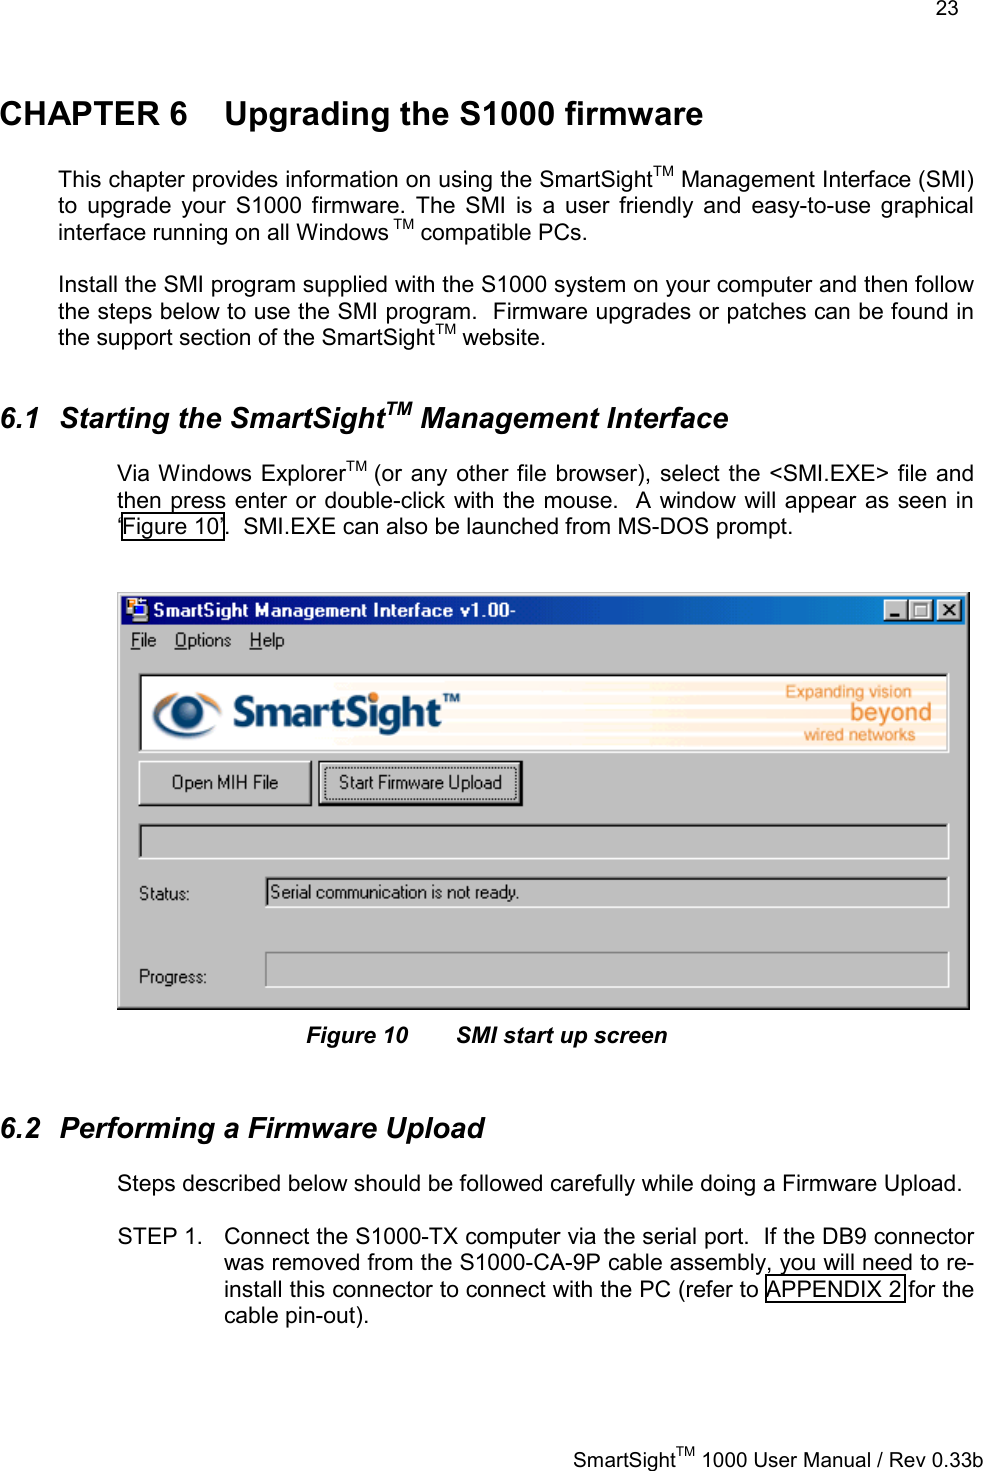    23   SmartSightTM 1000 User Manual / Rev 0.33b  CHAPTER 6  Upgrading the S1000 firmware  This chapter provides information on using the SmartSightTM Management Interface (SMI) to upgrade your S1000 firmware. The SMI is a user friendly and easy-to-use graphical interface running on all Windows TM compatible PCs.  Install the SMI program supplied with the S1000 system on your computer and then follow the steps below to use the SMI program.  Firmware upgrades or patches can be found in the support section of the SmartSightTM website.  6.1 Starting the SmartSightTM Management Interface Via Windows ExplorerTM  (or any other file browser), select the &lt;SMI.EXE&gt; file and then press enter or double-click with the mouse.  A window will appear as seen in ‘Figure 10’.  SMI.EXE can also be launched from MS-DOS prompt.    Figure 10  SMI start up screen  6.2  Performing a Firmware Upload Steps described below should be followed carefully while doing a Firmware Upload.  STEP 1.  Connect the S1000-TX computer via the serial port.  If the DB9 connector was removed from the S1000-CA-9P cable assembly, you will need to re-install this connector to connect with the PC (refer to APPENDIX 2 for the cable pin-out).  